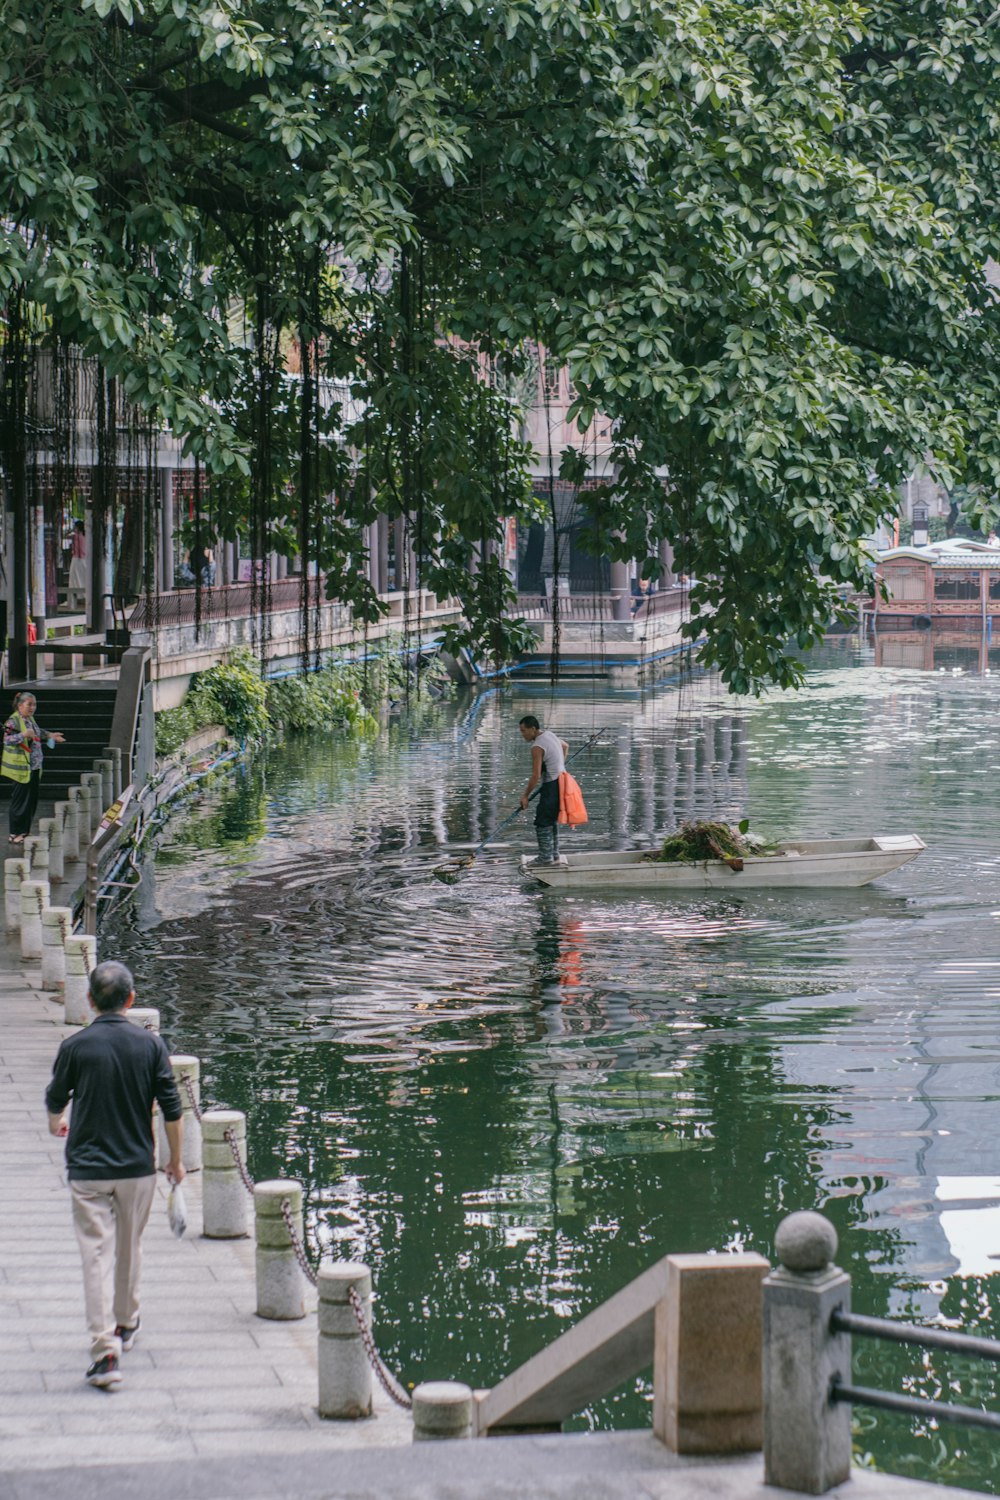 people walking on a sidewalk next to a body of water